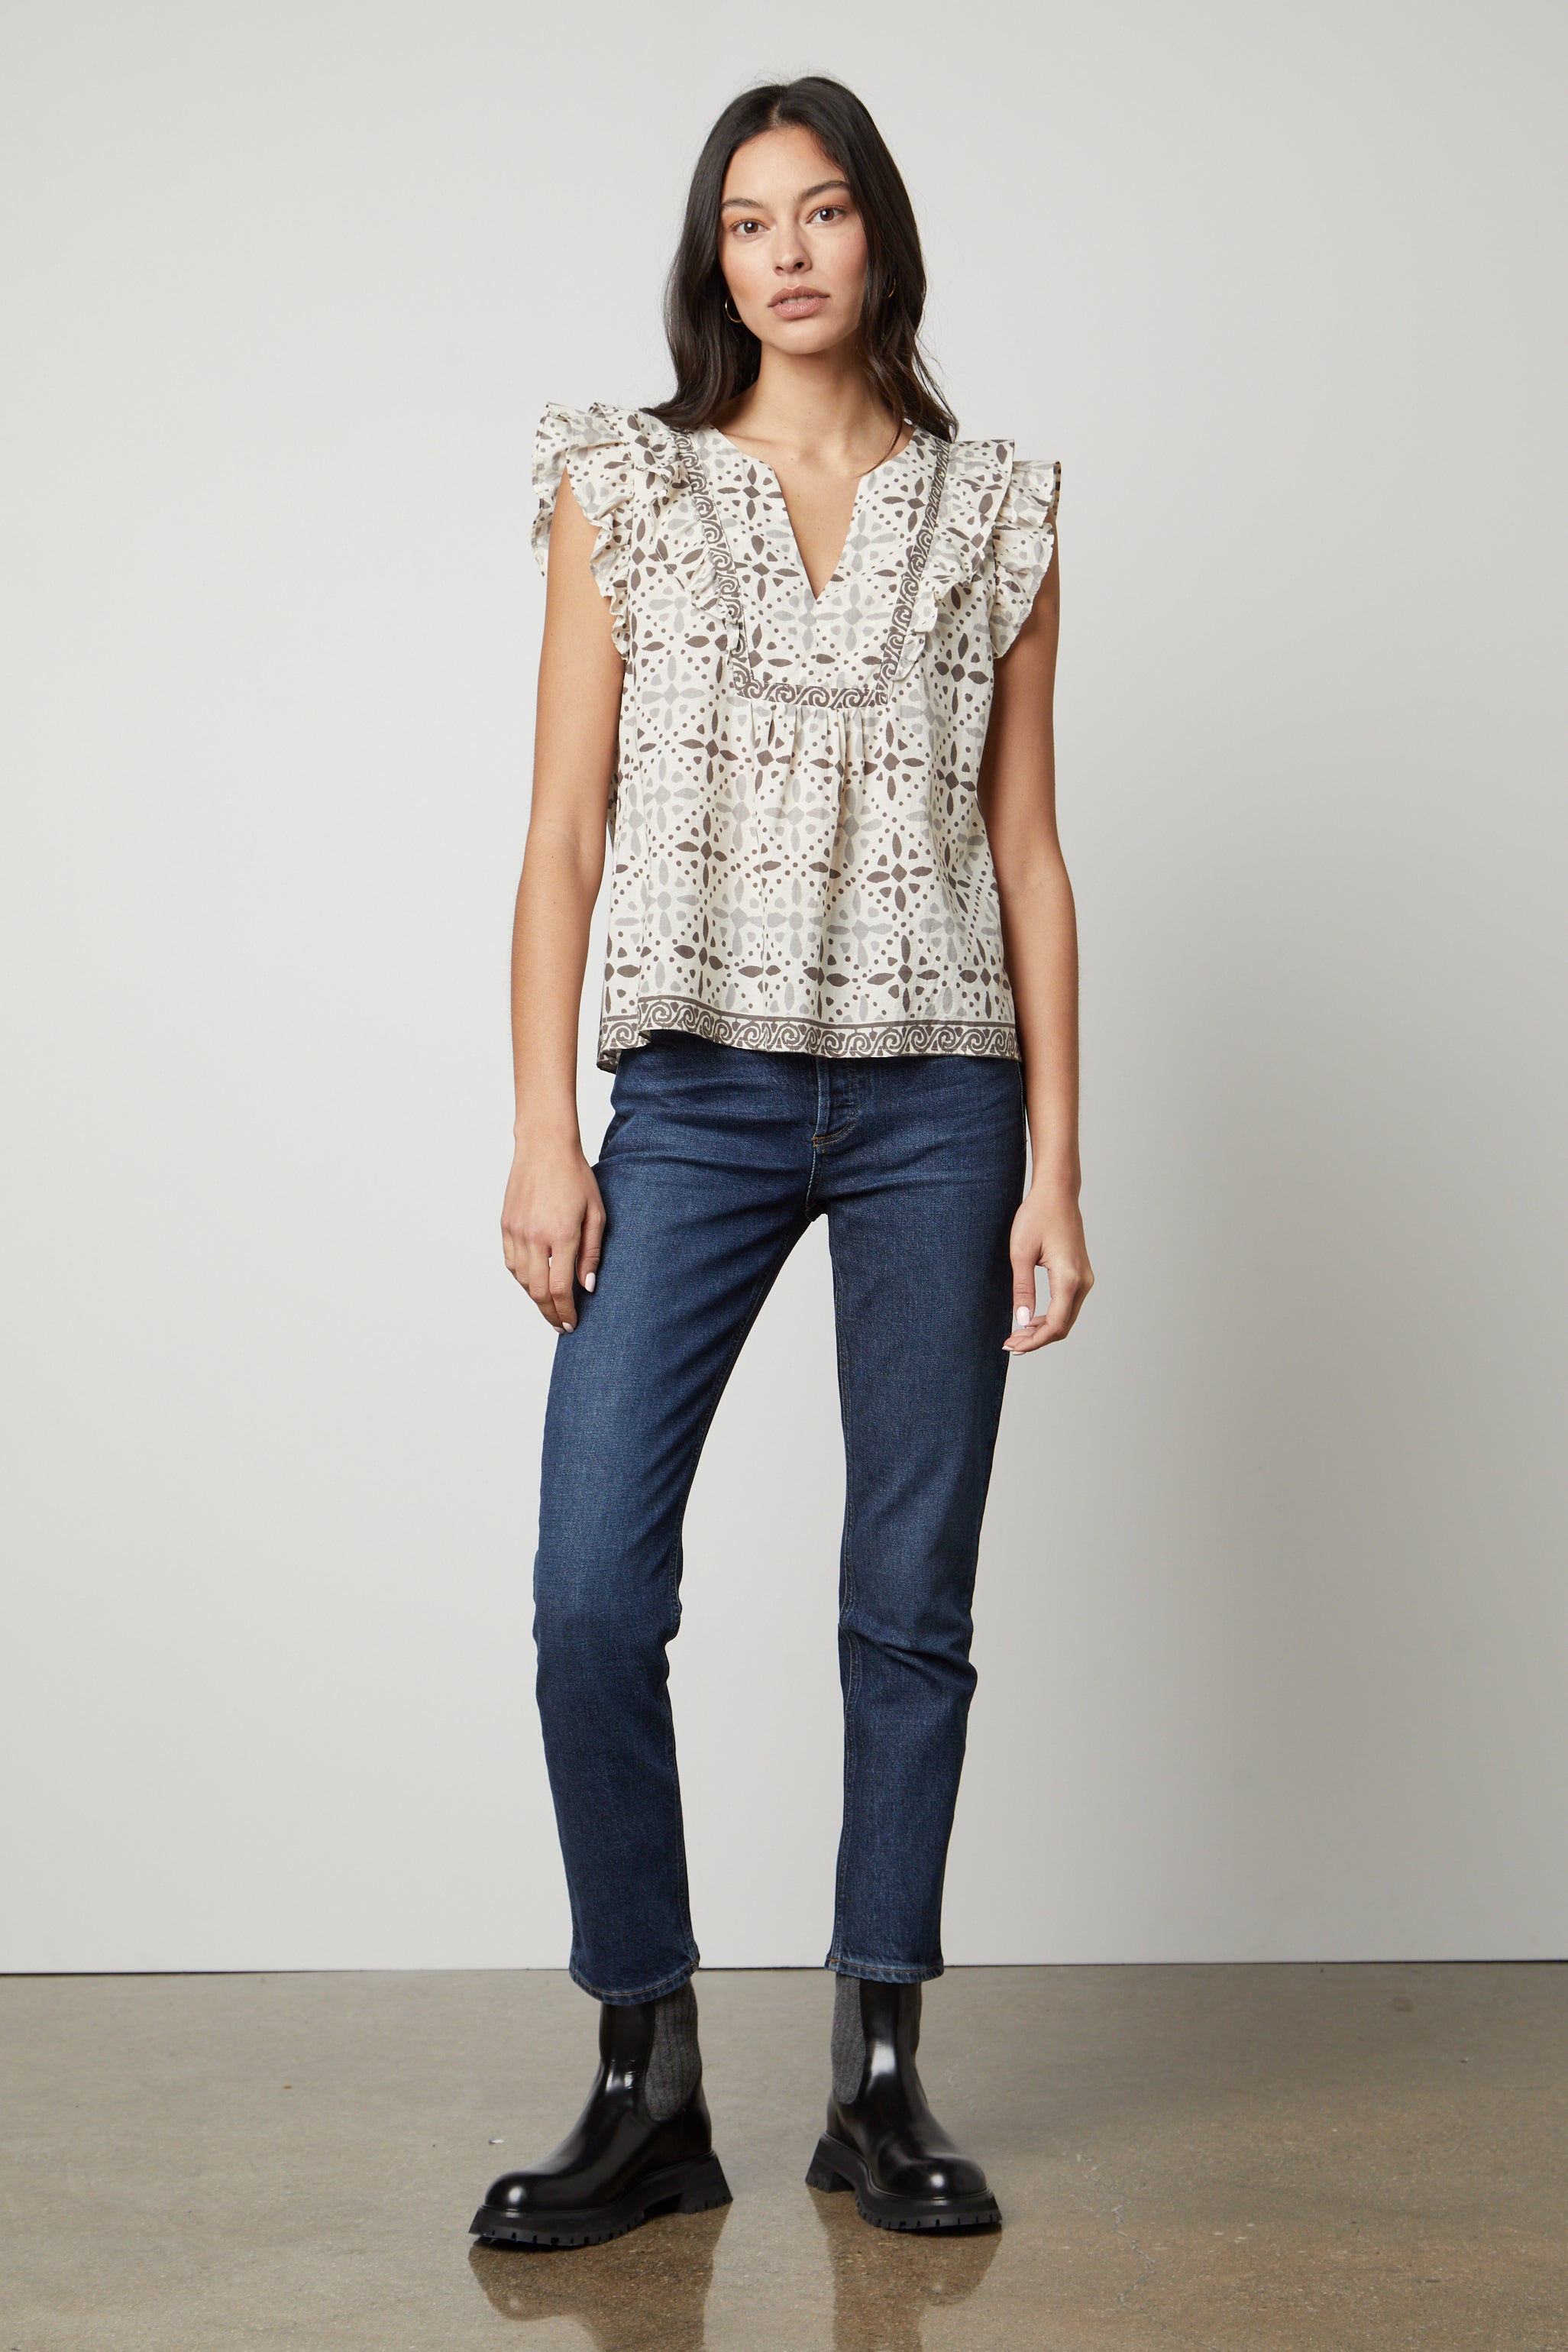   The model is wearing jeans and a CORIN PRINTED TANK TOP by Velvet by Graham & Spencer with ruffled sleeves. 